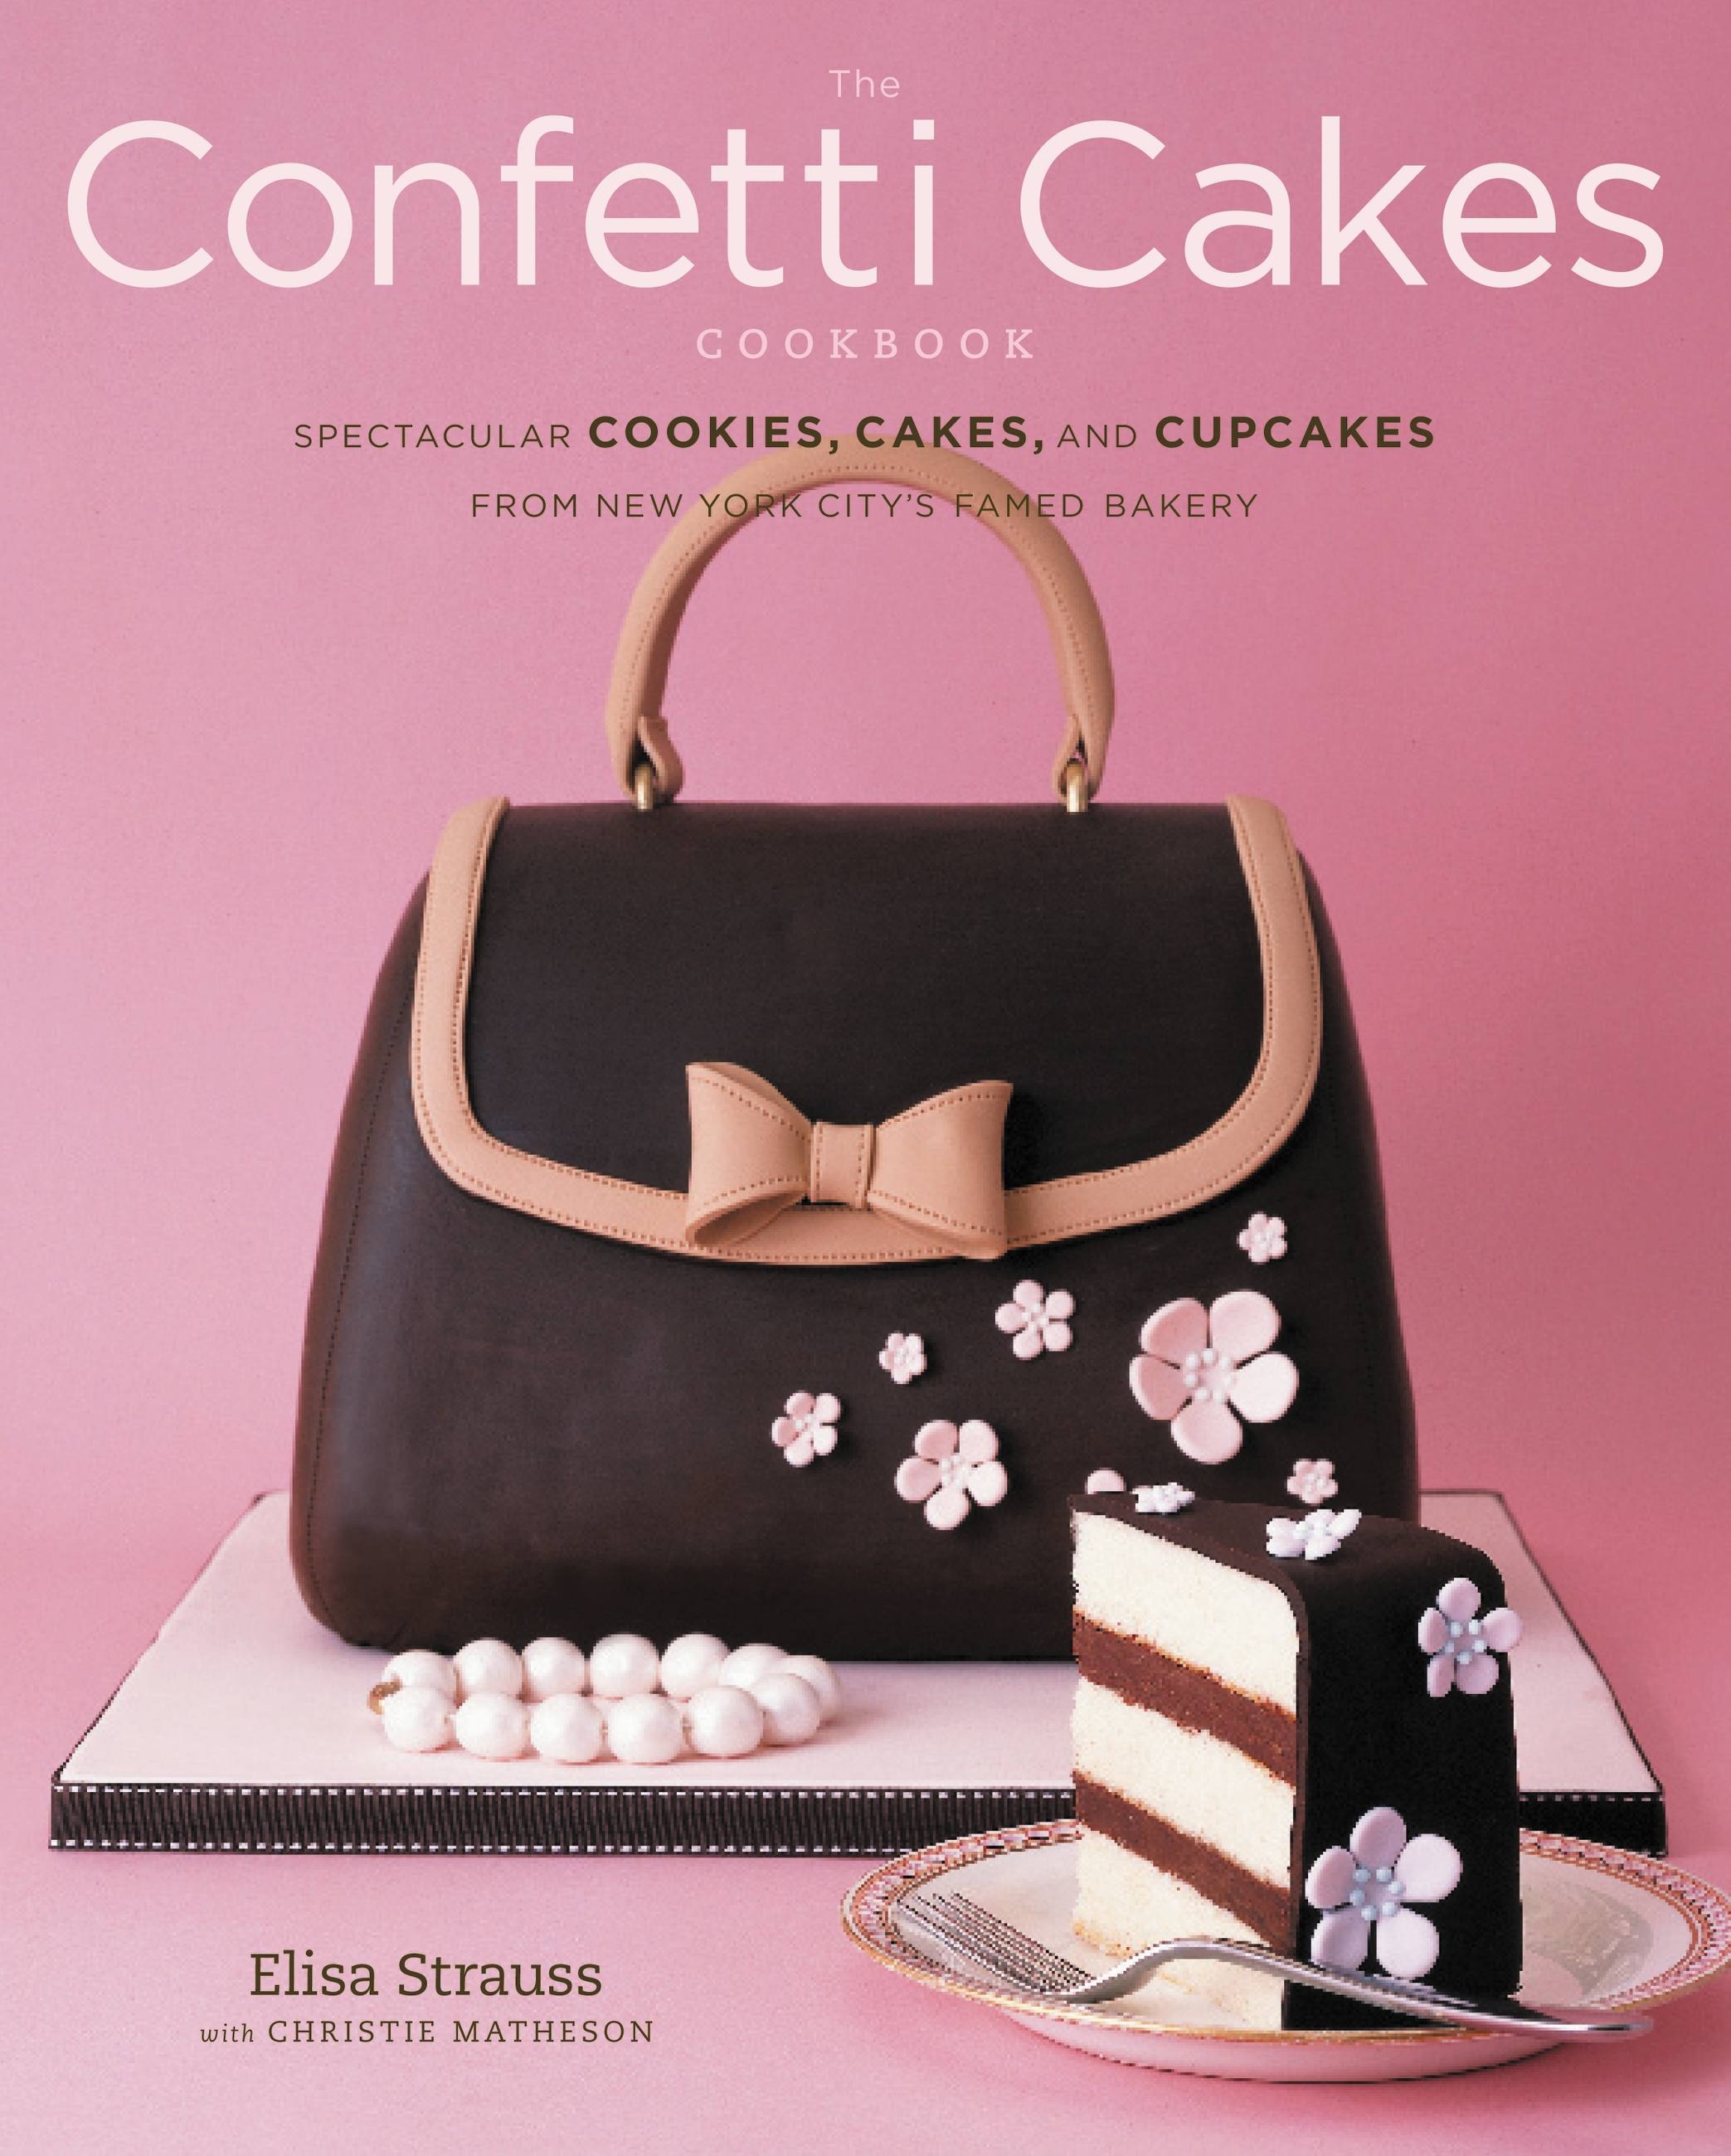 Strauss　Hachette　Cakes　Elisa　The　Cookbook　Book　Confetti　by　Group